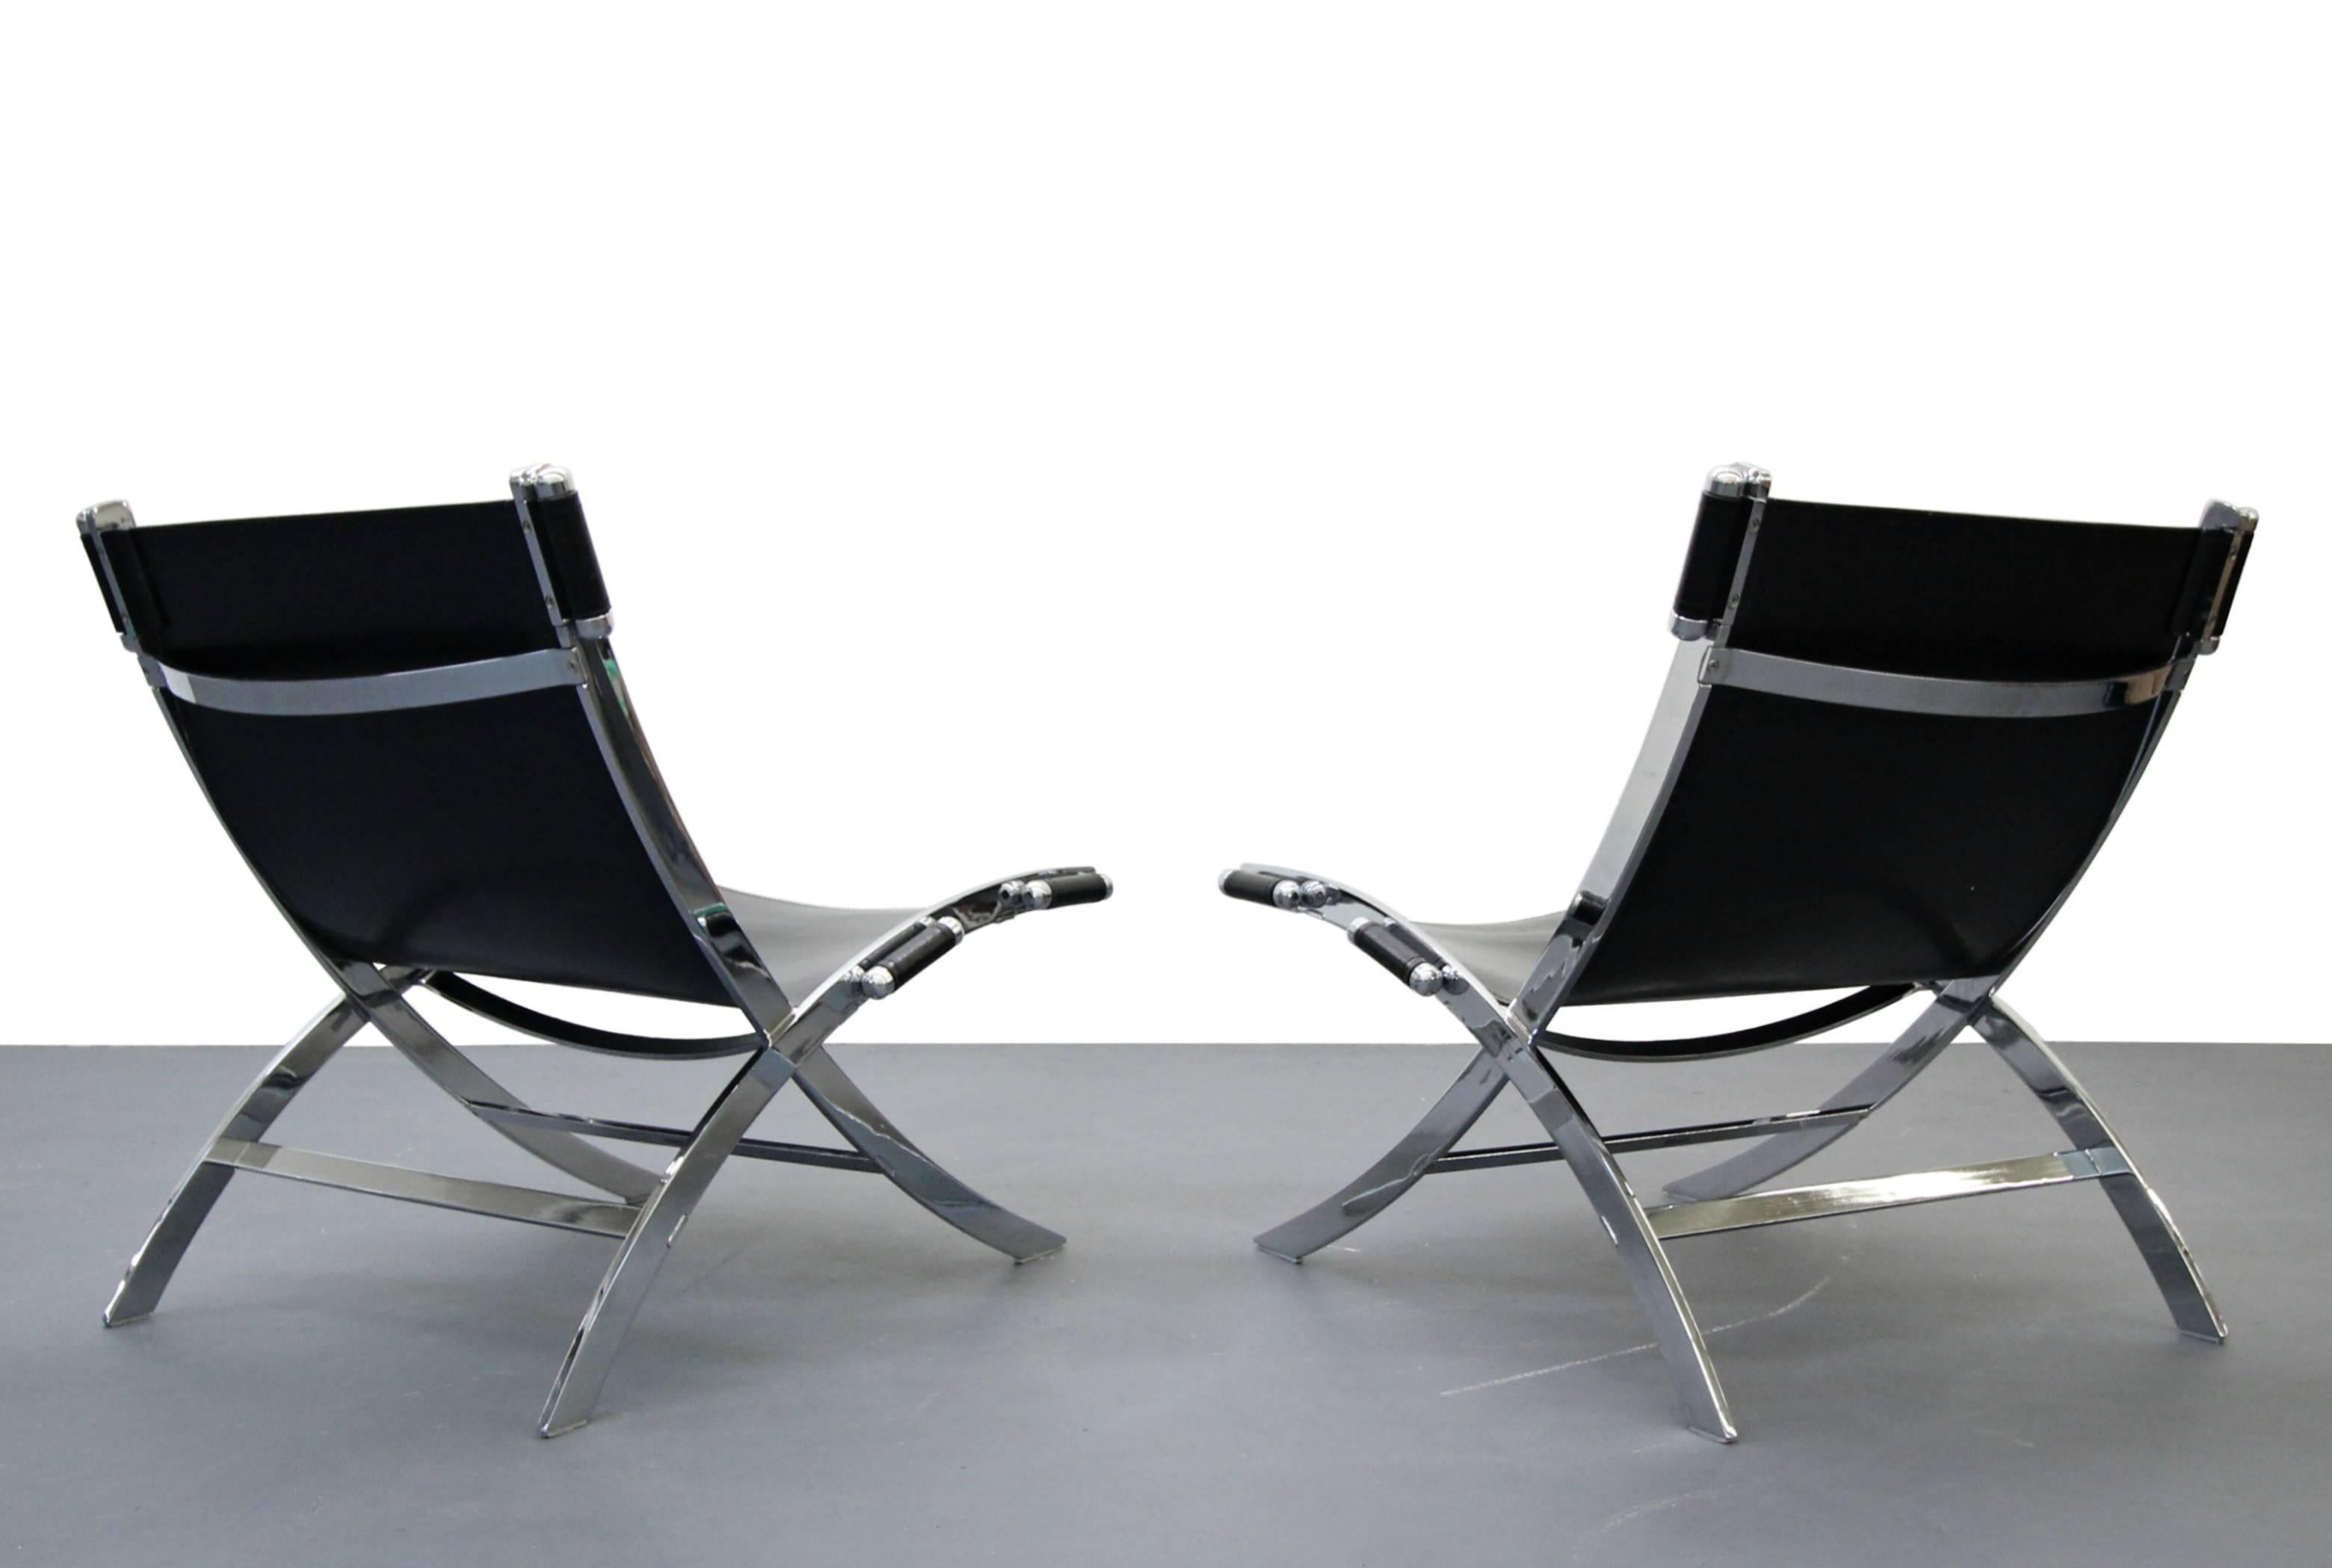 This pair of Mid-Century Italian chrome and leather sling scissor chairs. This gorgeous pair of chairs is heavy duty, weighing close to 75lbs a piece. They are constructed out of solid steel and thick genuine leather. These chairs are very modern in